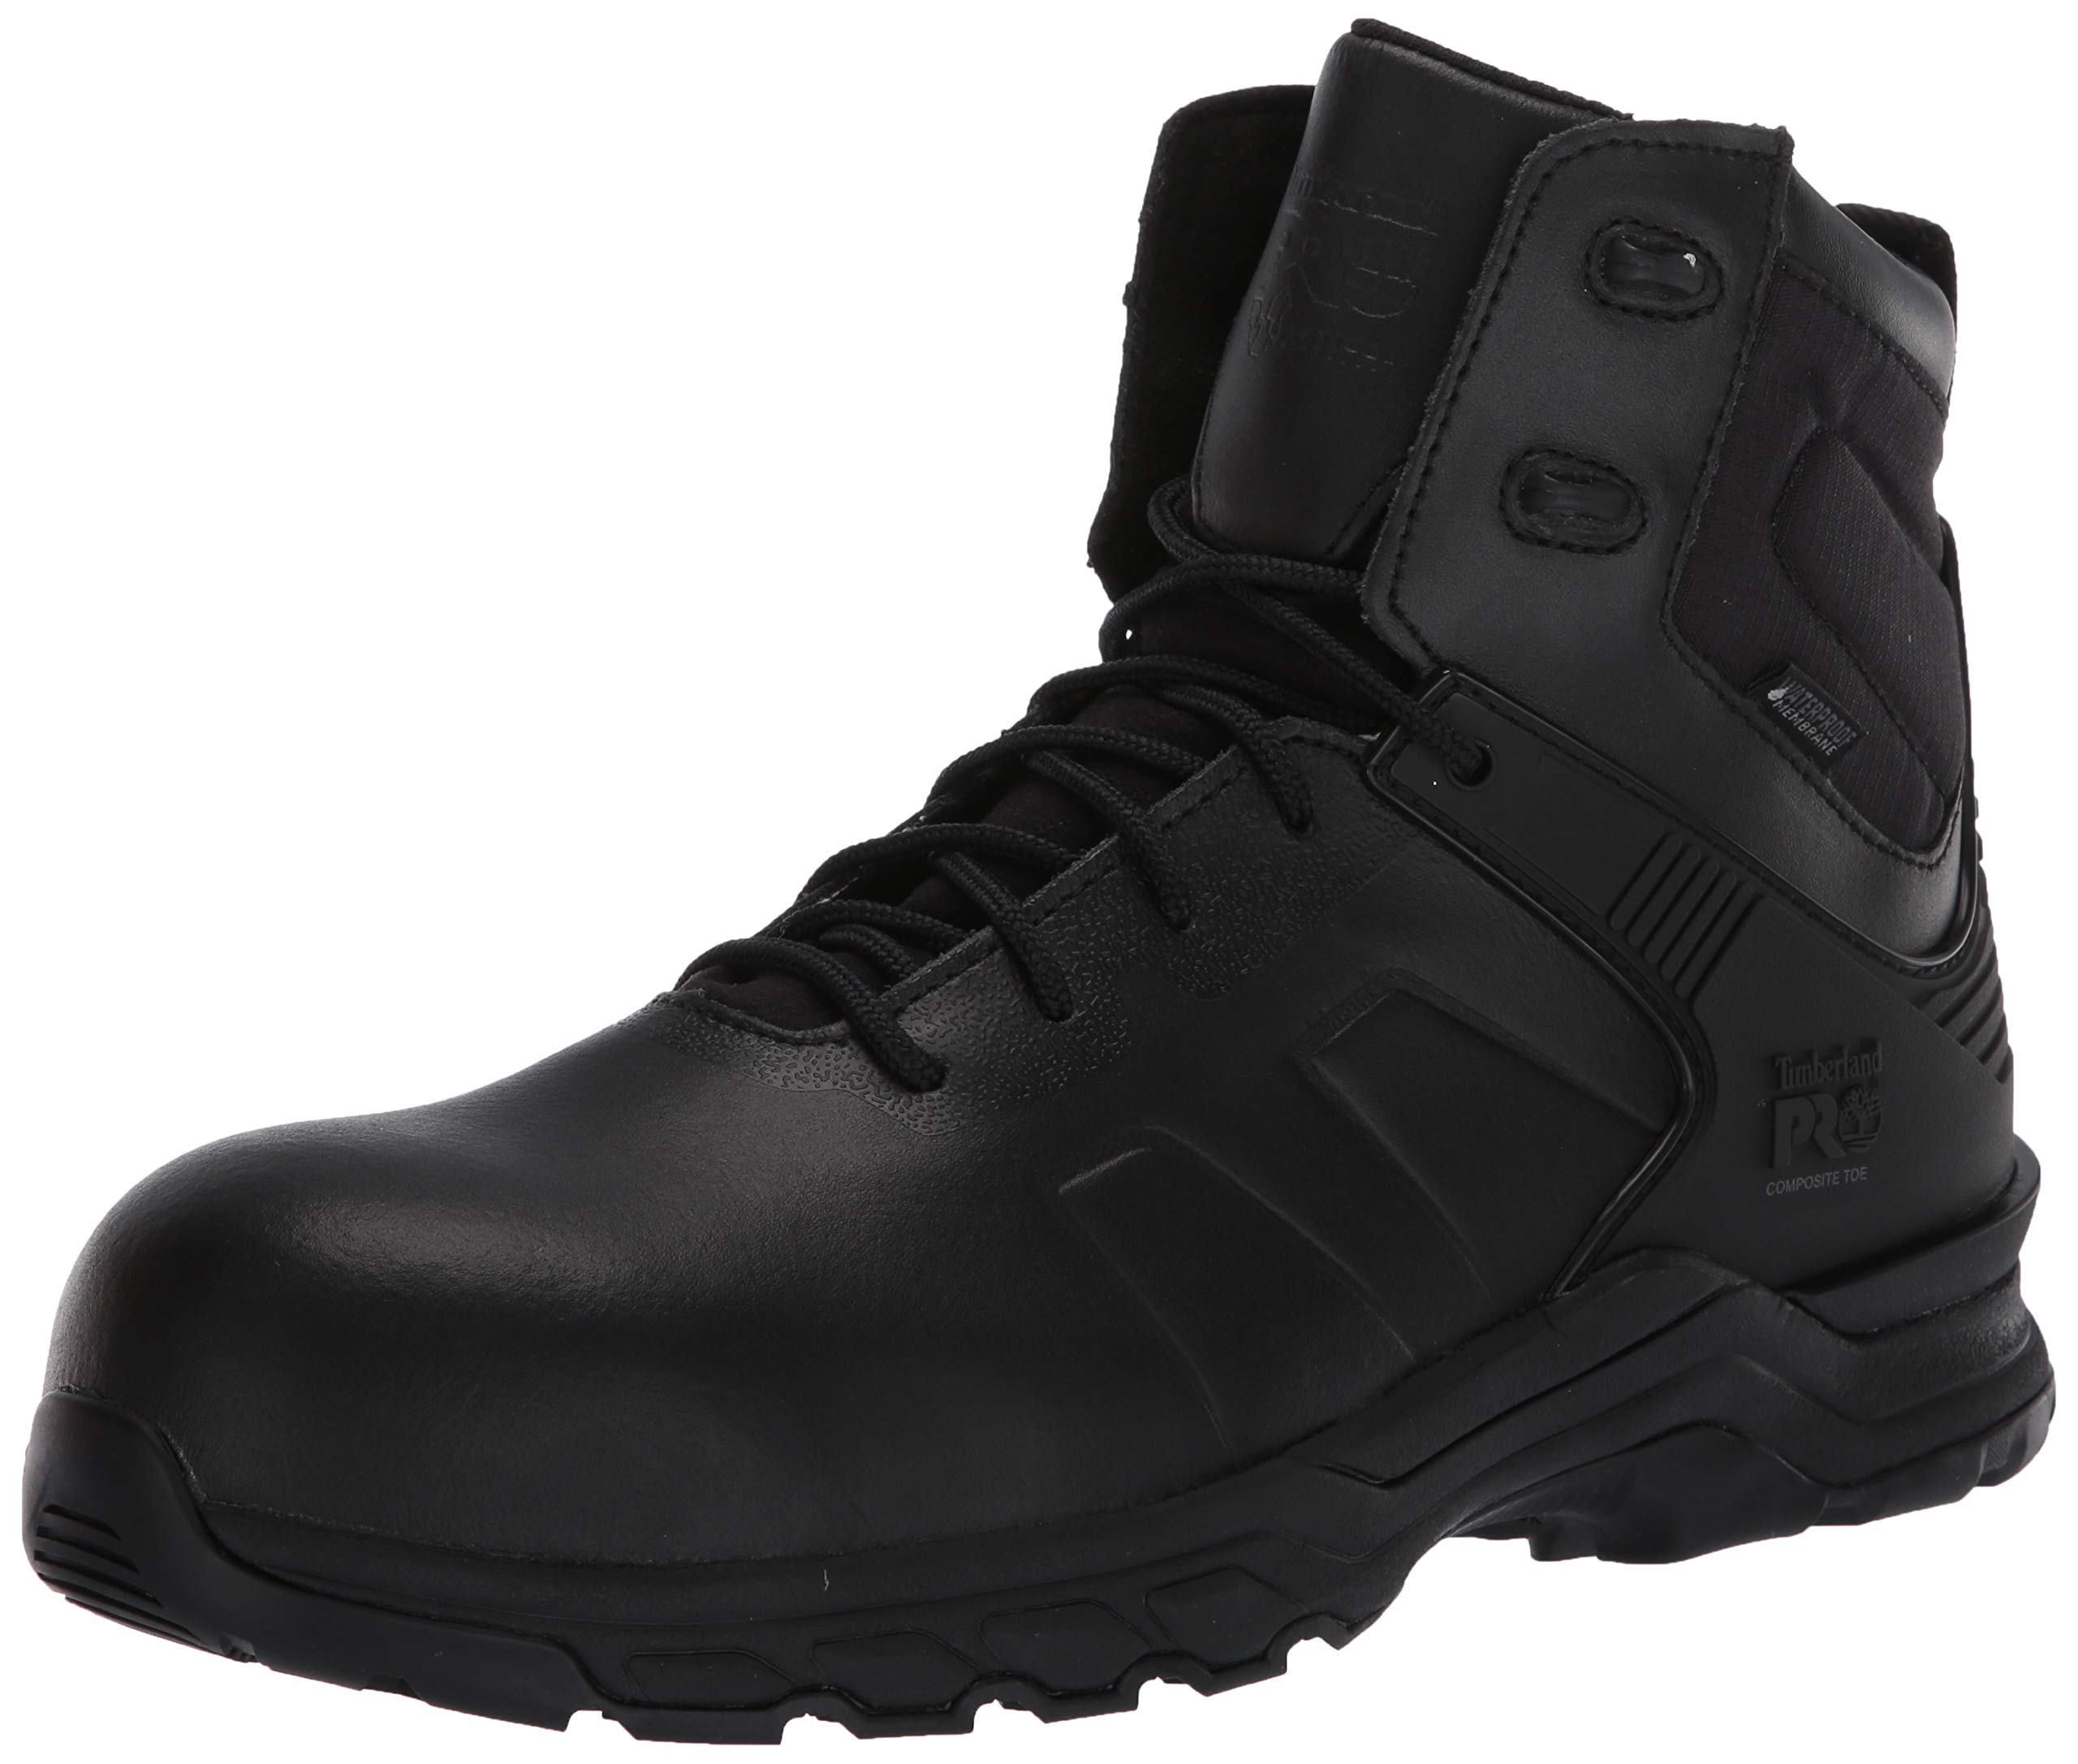 Timberland PRO Men's Hypercharge 6 Inch Composite Safety Toe Puncture Resistant Side-Zip Waterproof Tactical Duty Uniform Work